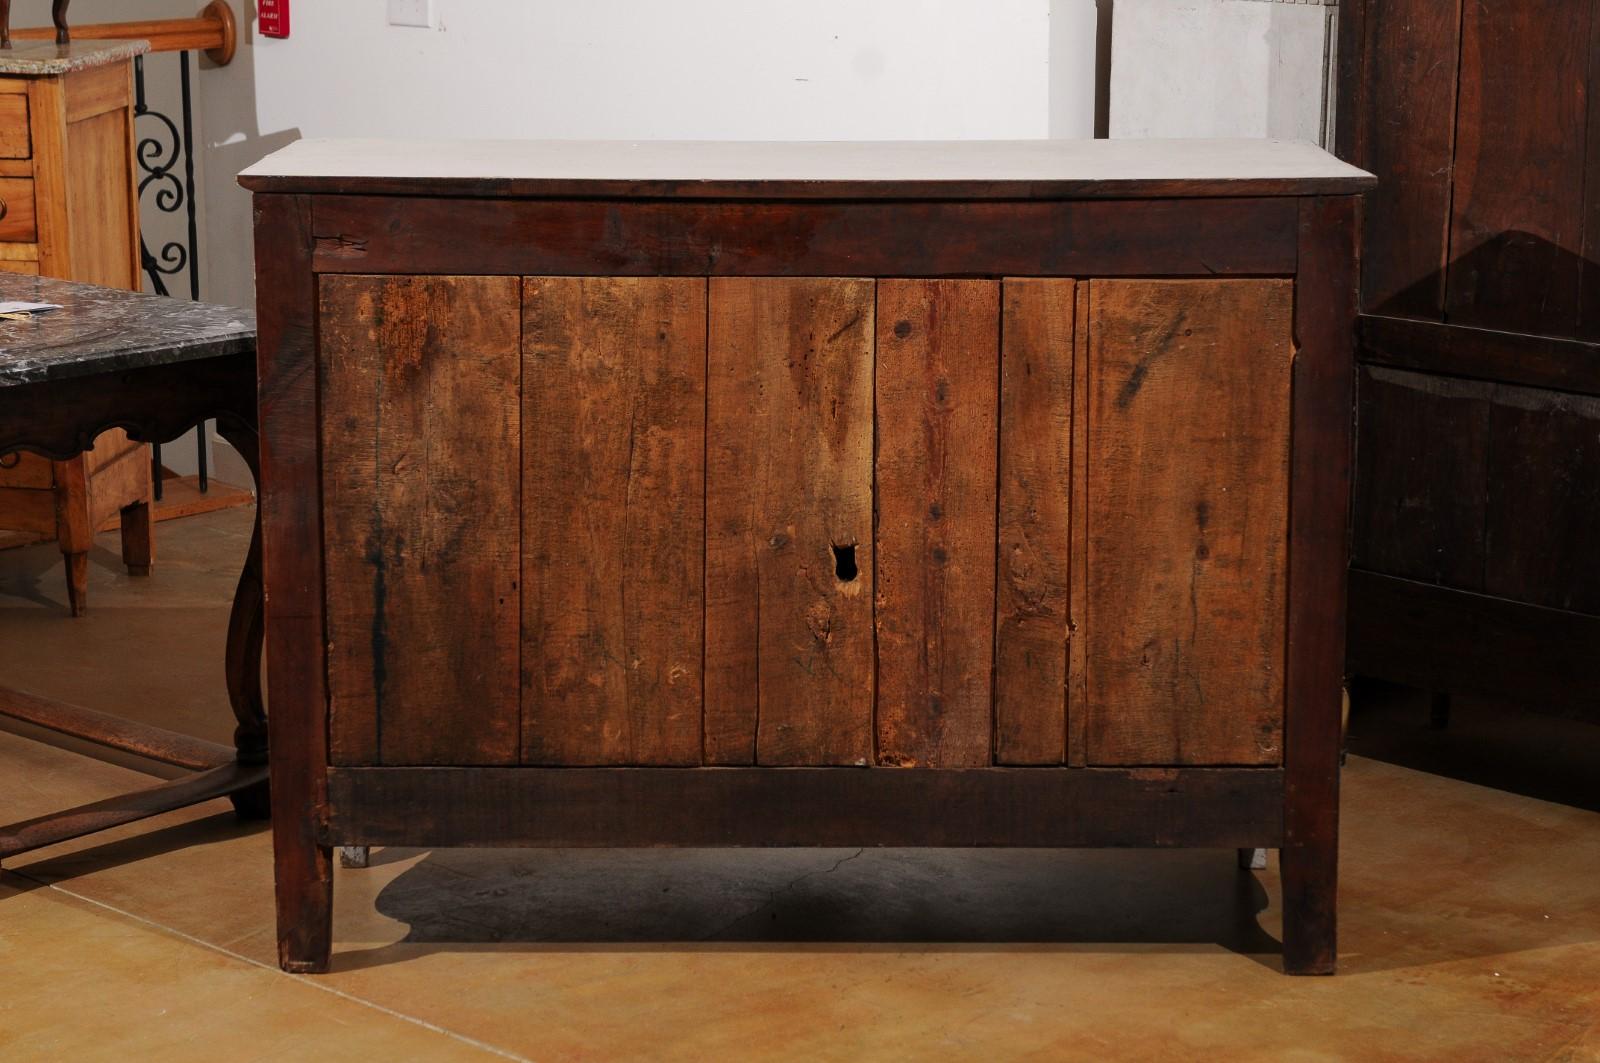 French 19th Century Painted Buffet with Drawers, Doors and Distressed Finish For Sale 5